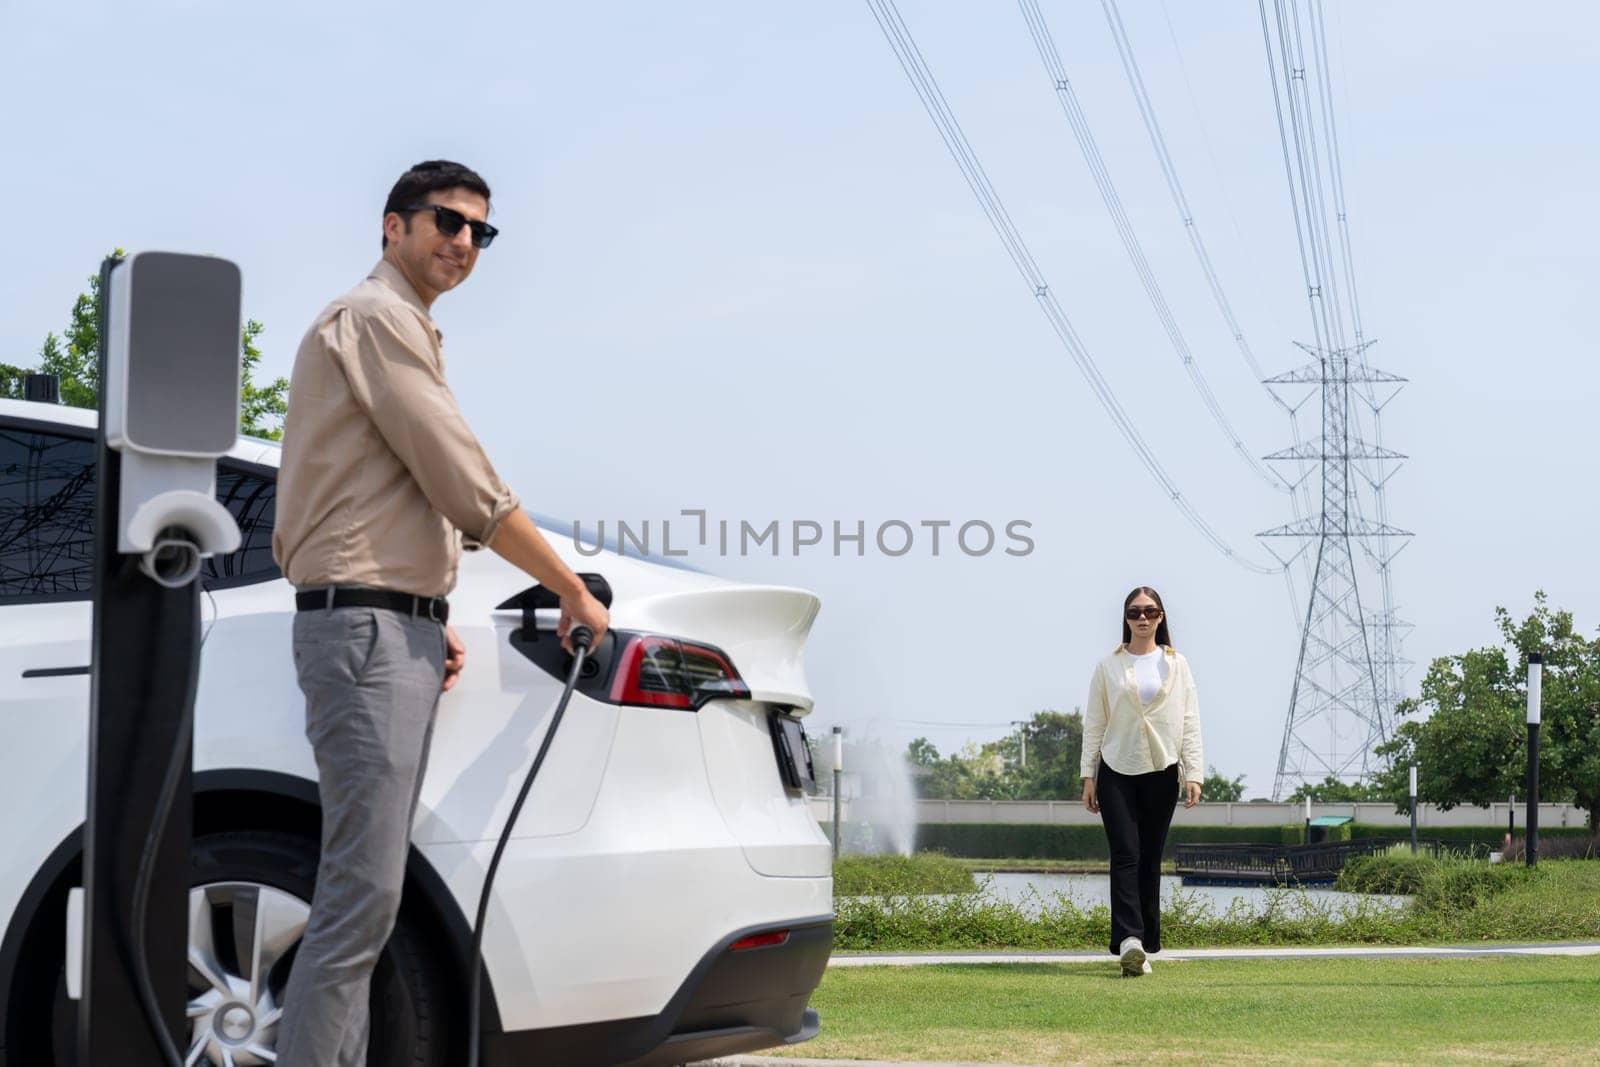 Young couple recharge EV car battery at charging station. Expedient by biancoblue